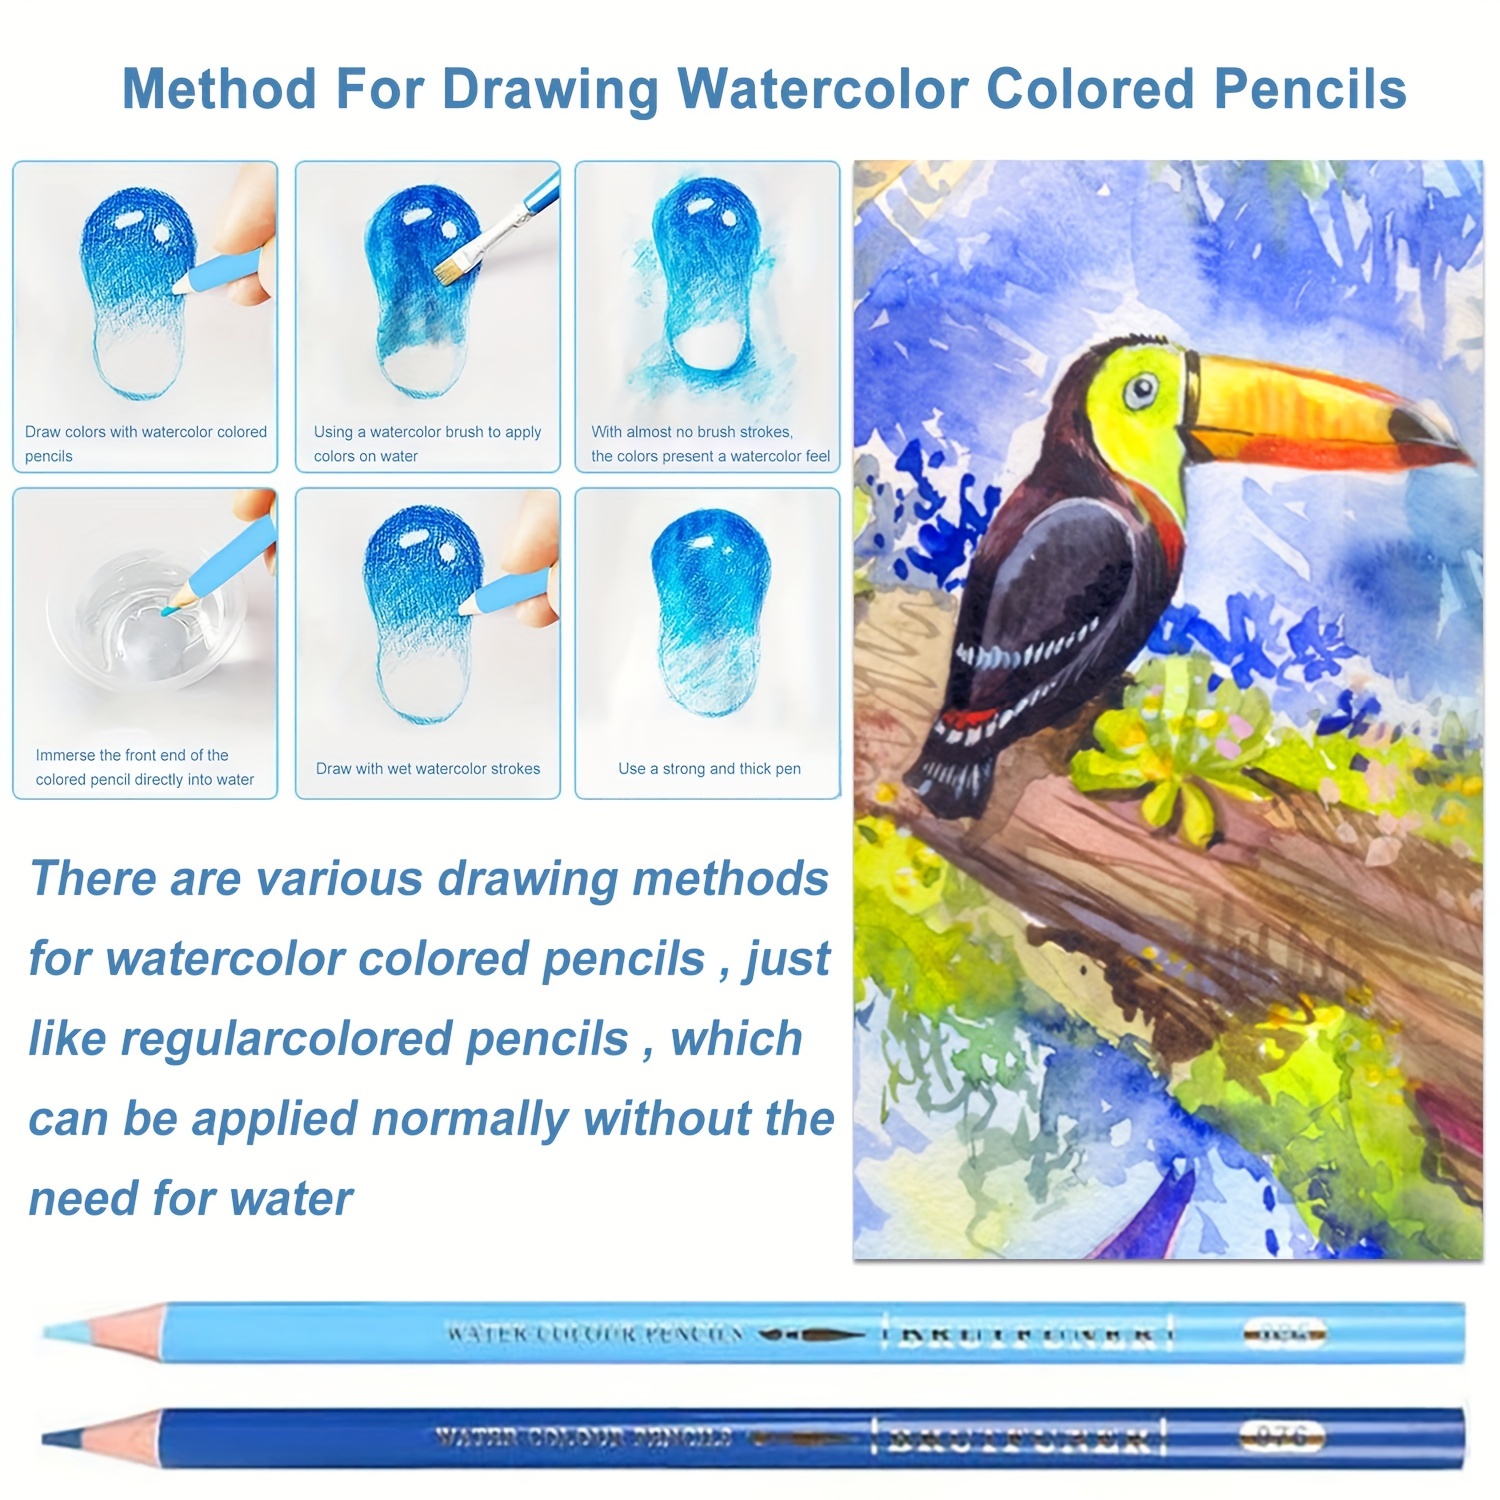 Use of Watercolors or Watercolor Pencils in Adult Coloring Books